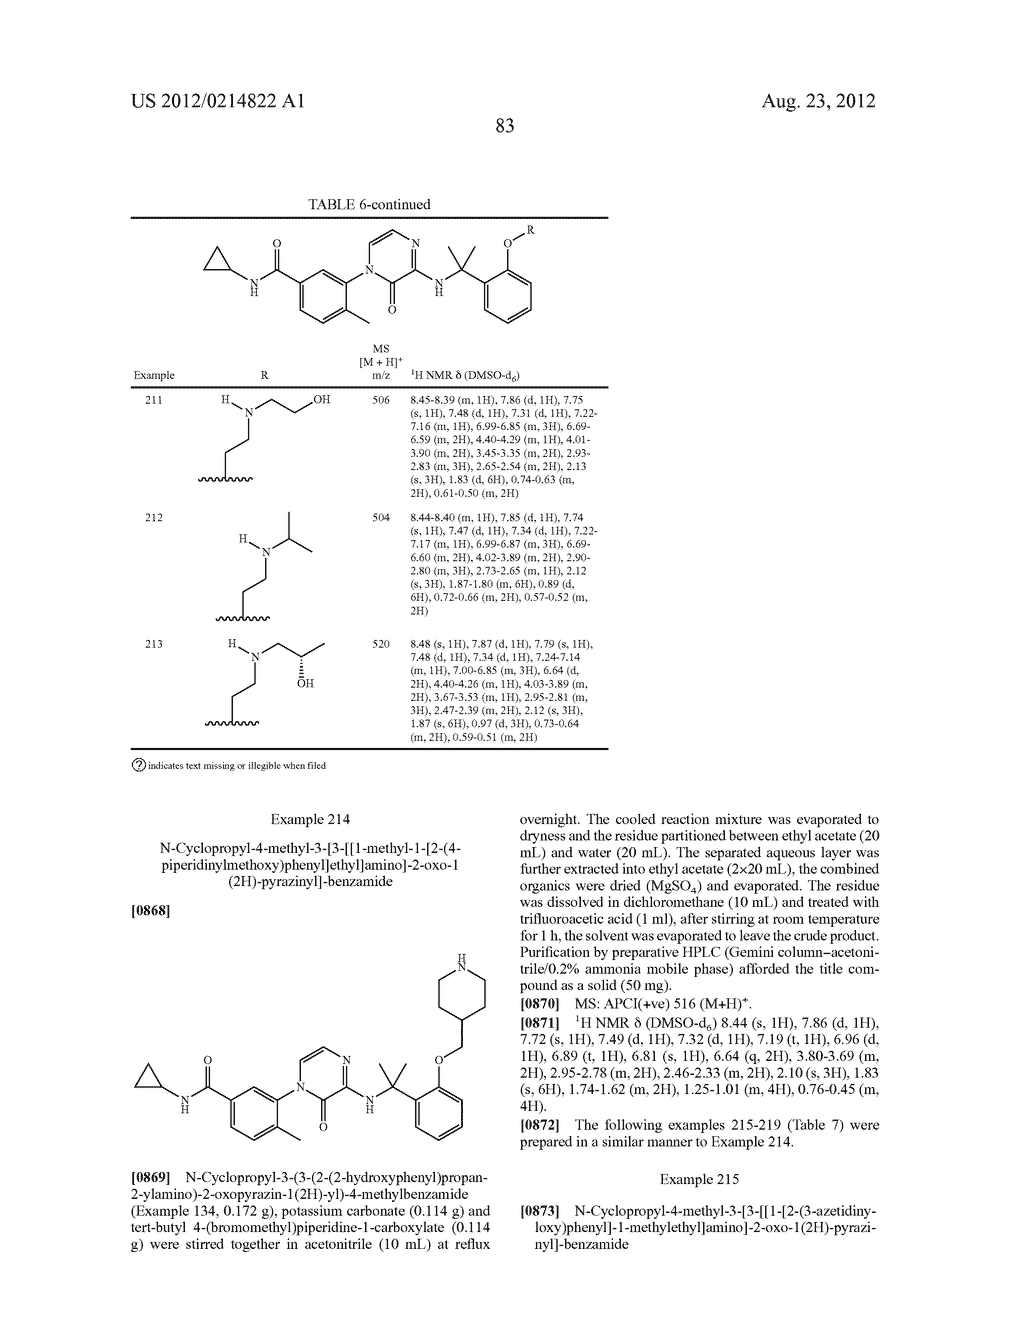 N-CYCLOPROPYL-3-FLUORO-5-[3-[[1-[2-[2-  [(2-HYDROXETHYL)AMINO]     ETHOXY]PHENYL] CYCLOPROPYL] AMINO]-2-OXO- 1     (2H)-PYRAZINYL]-4-METHYL-BENZAMIDE, OR PHARMACEUTICALLY ACCEPTABLE SALTS     THEREOF AND THEIR USES - diagram, schematic, and image 90